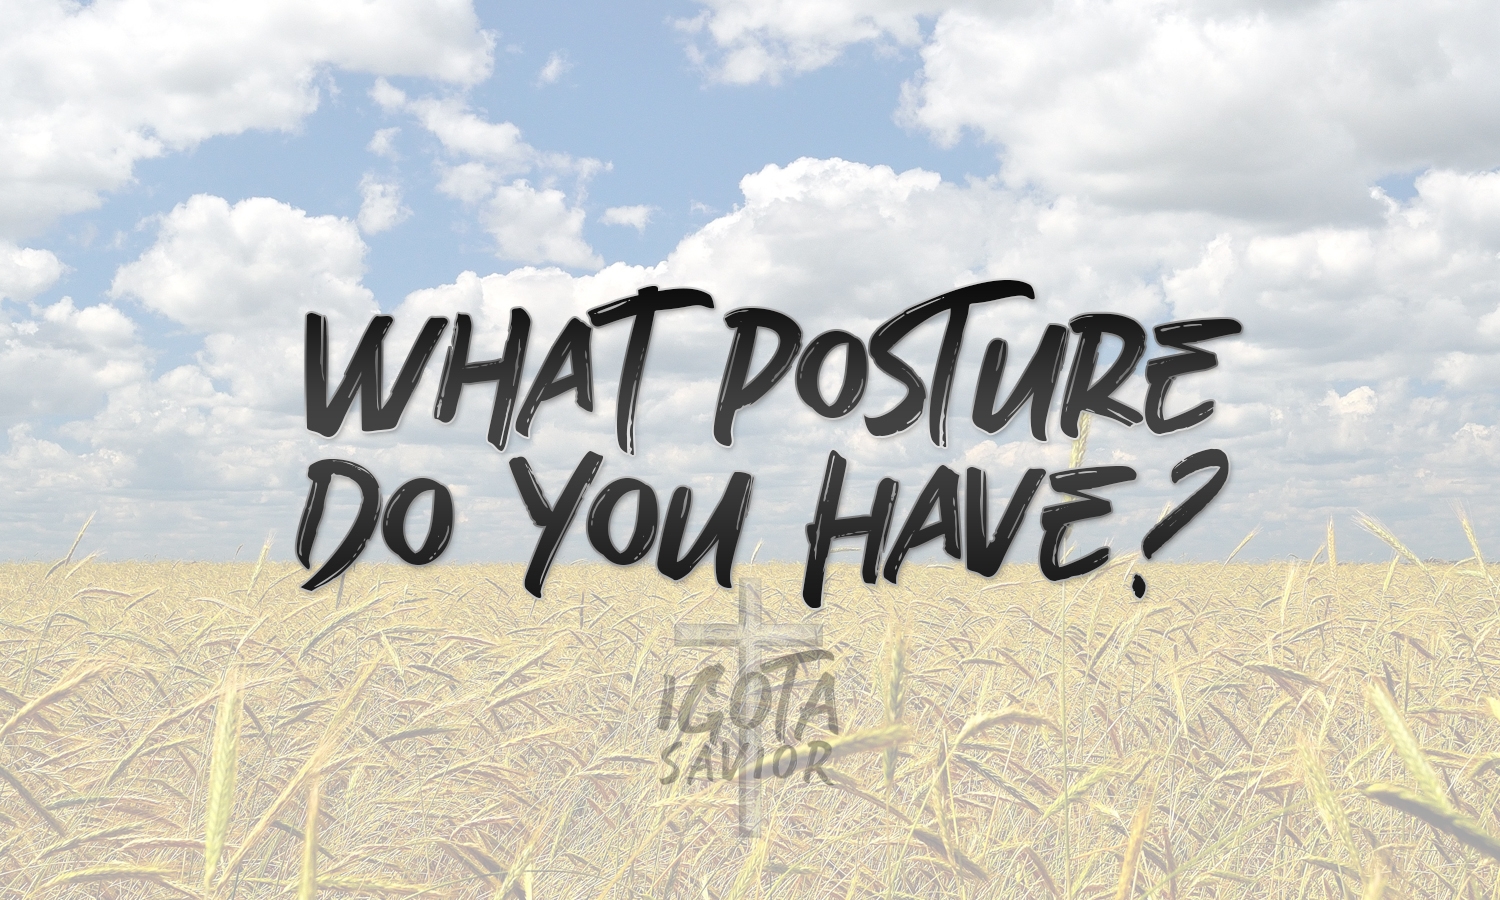 What Posture Do You Have?